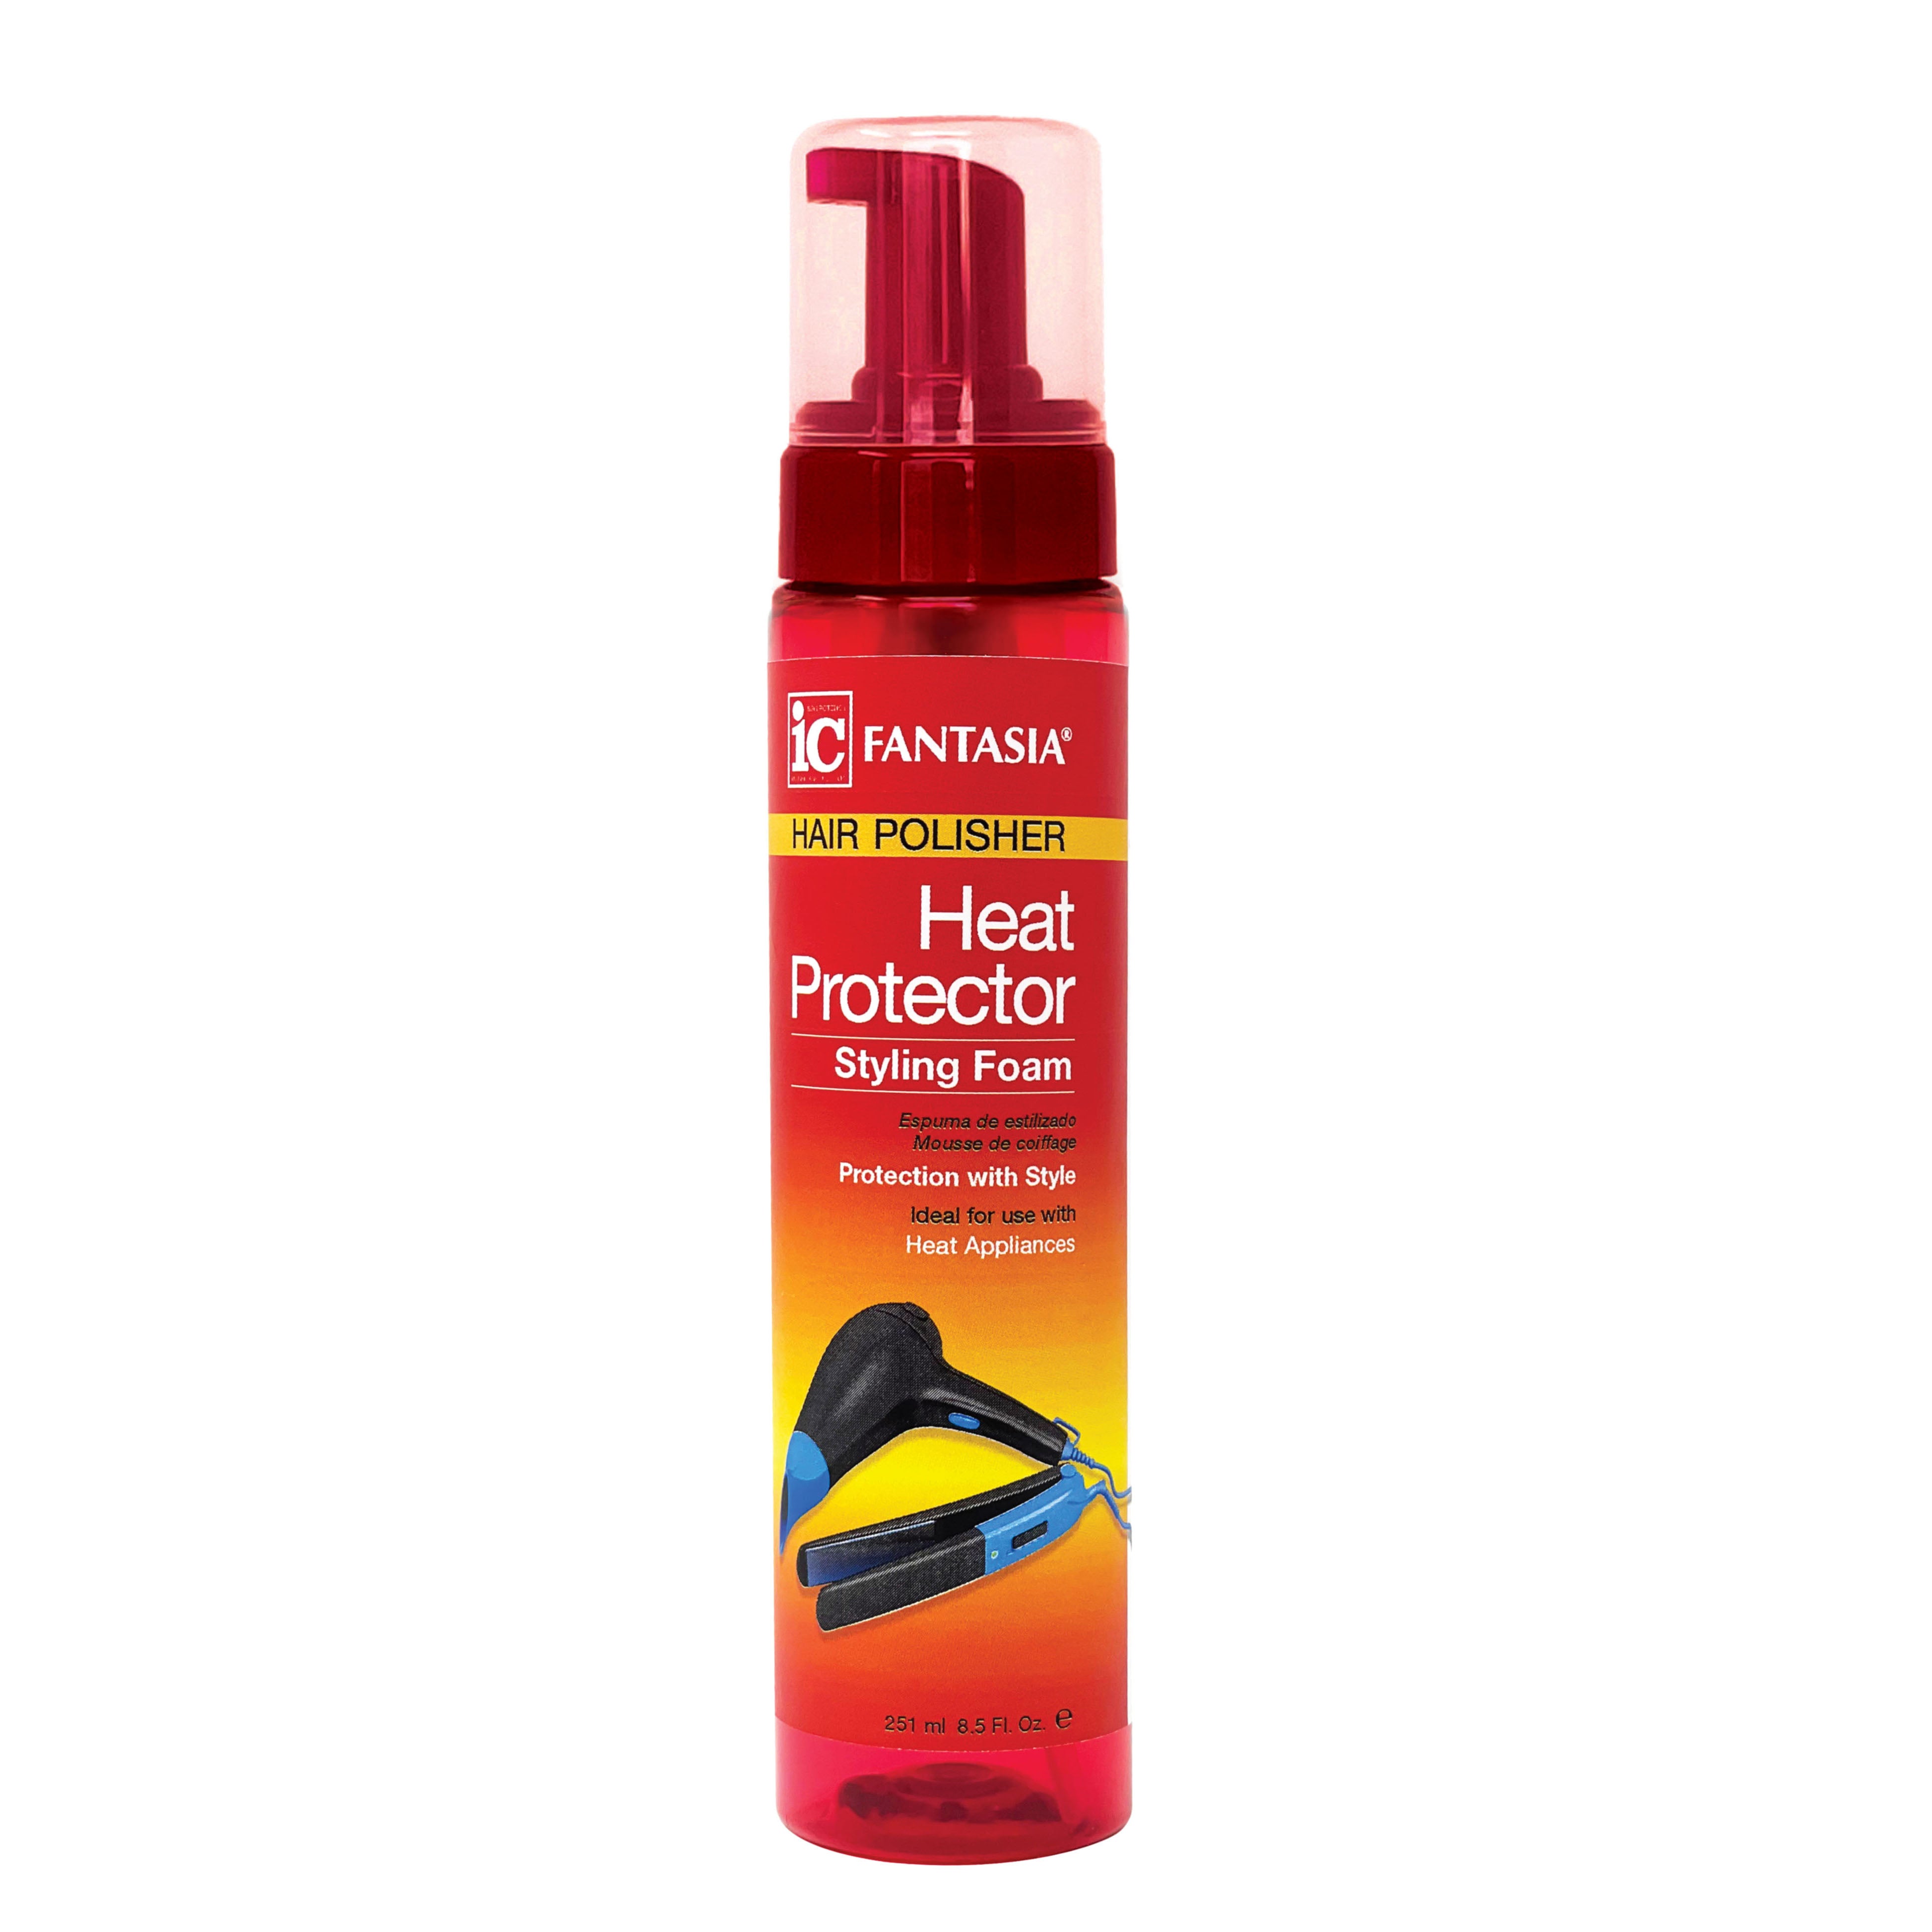 PROTECTOR OZ) Industries STYLING - Fantasia – HEAT (8.5 Care Hair NEW! FOAM